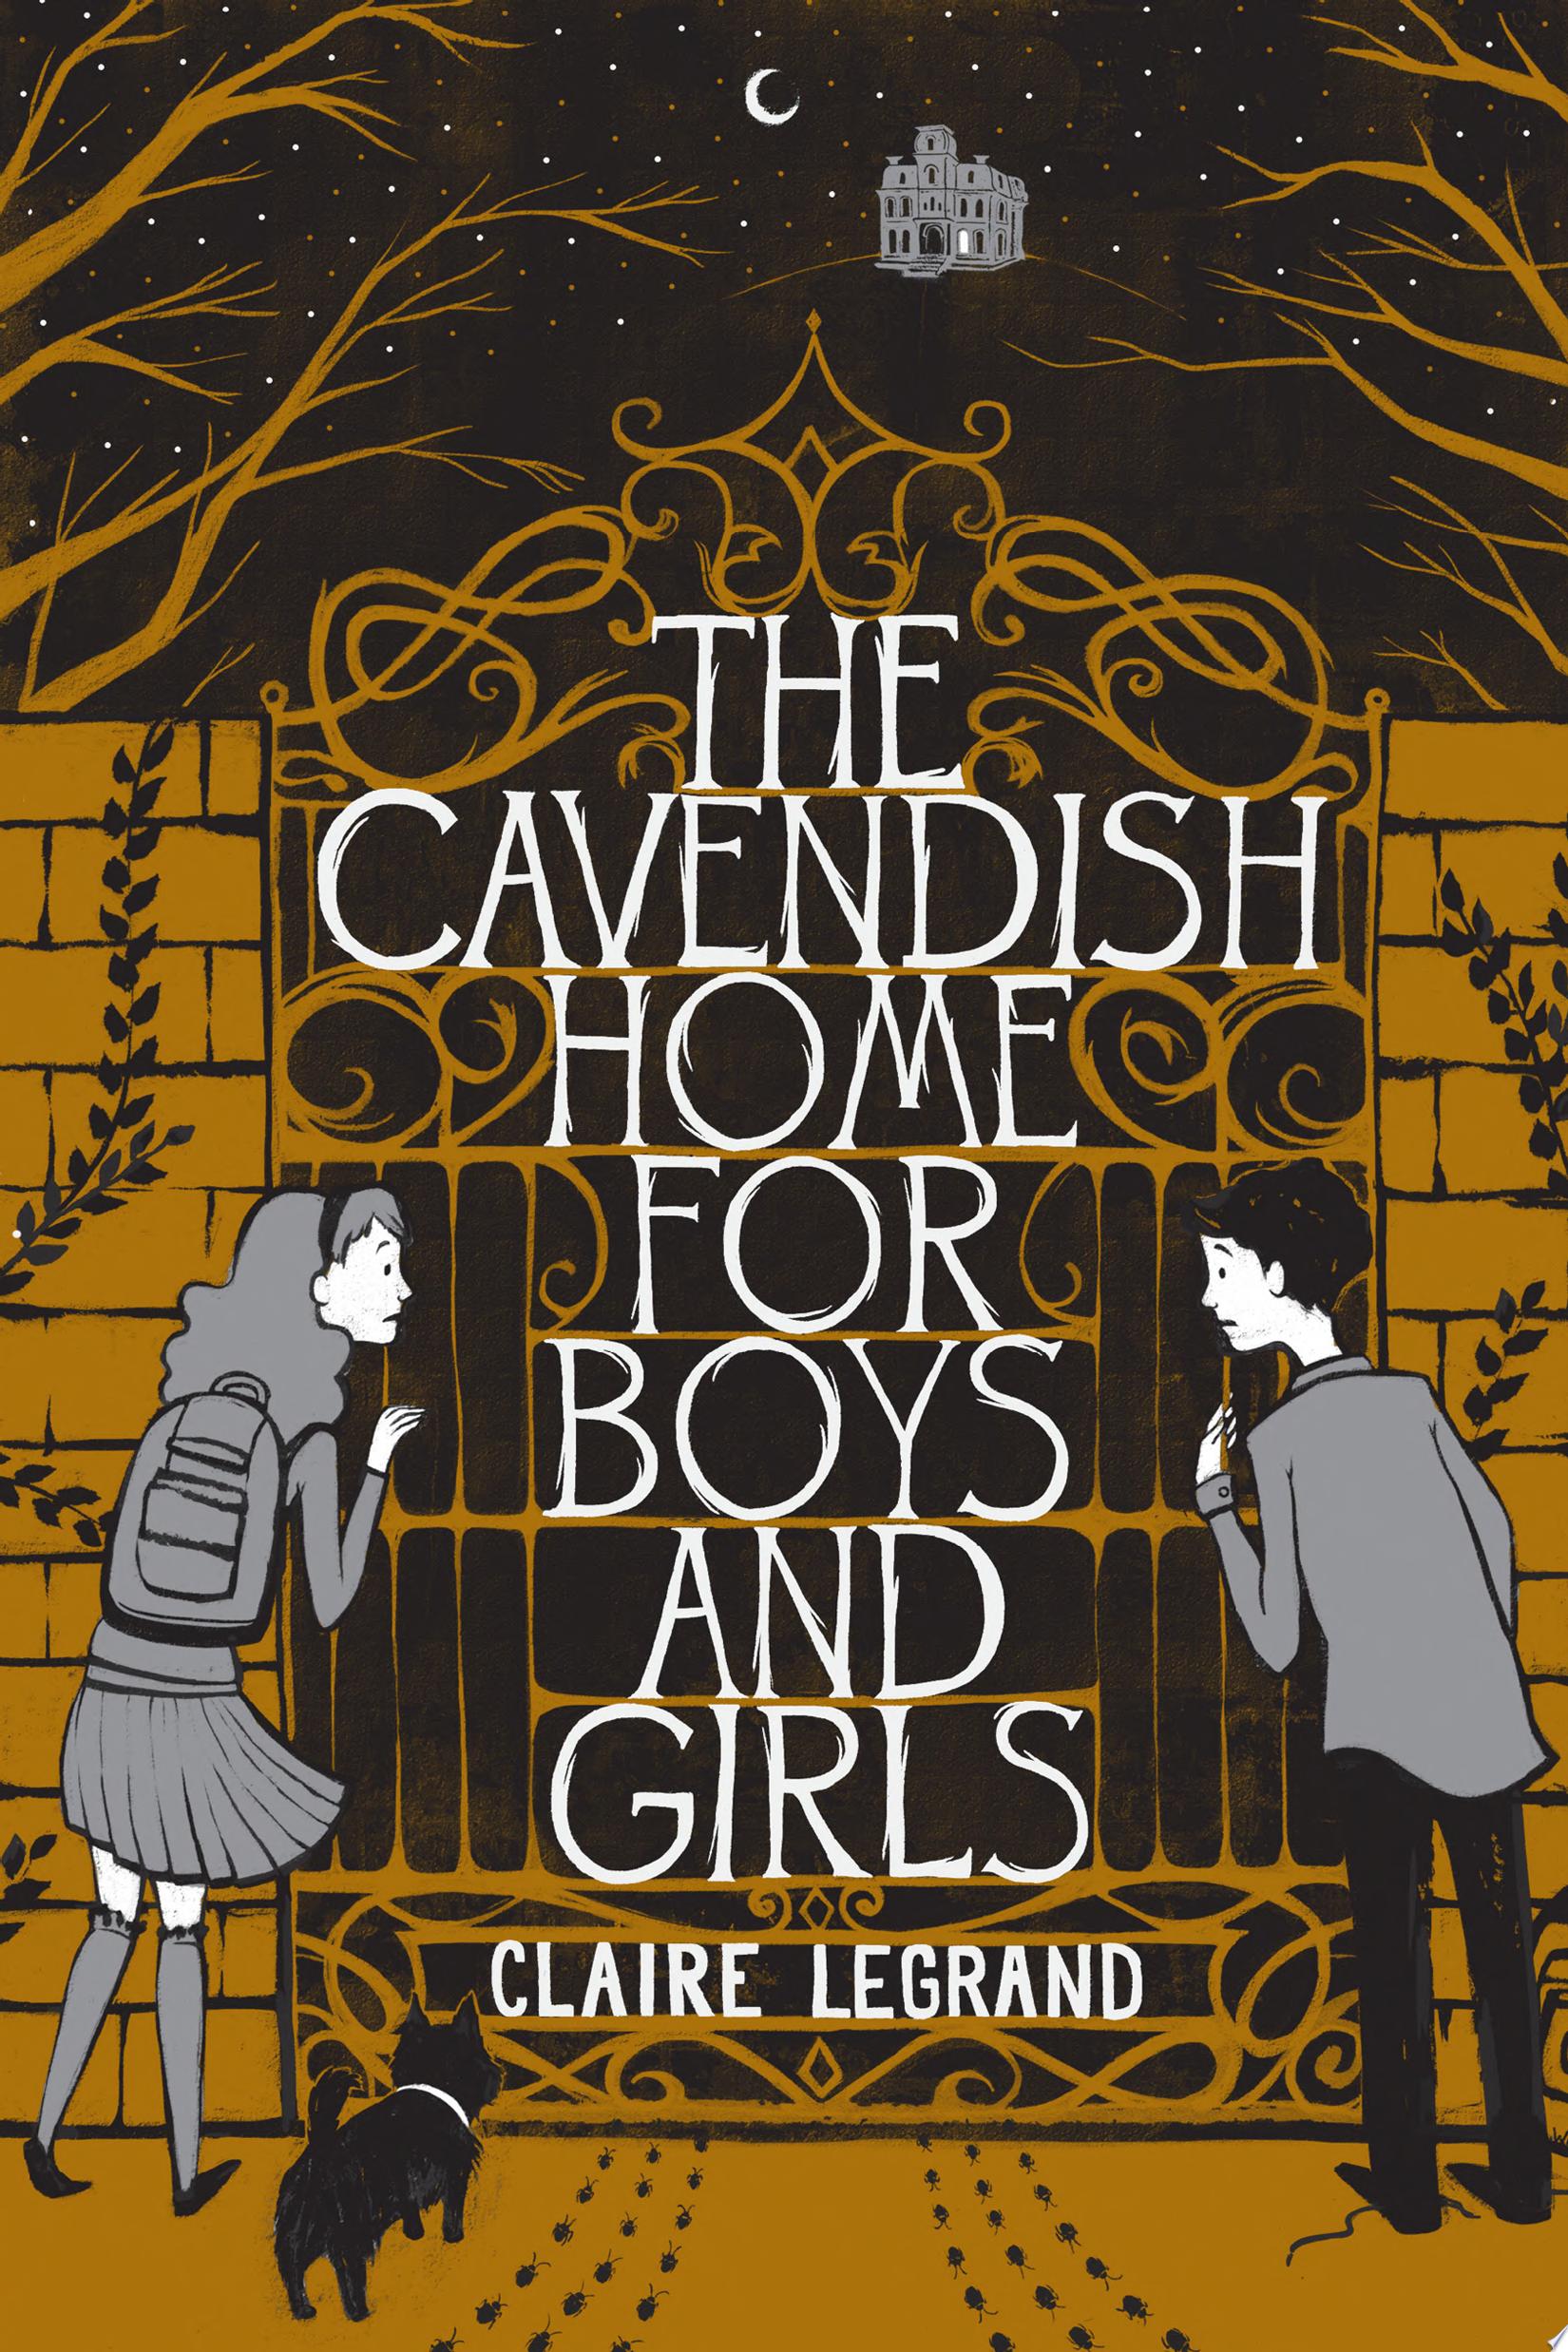 Image for "The Cavendish Home for Boys and Girls"